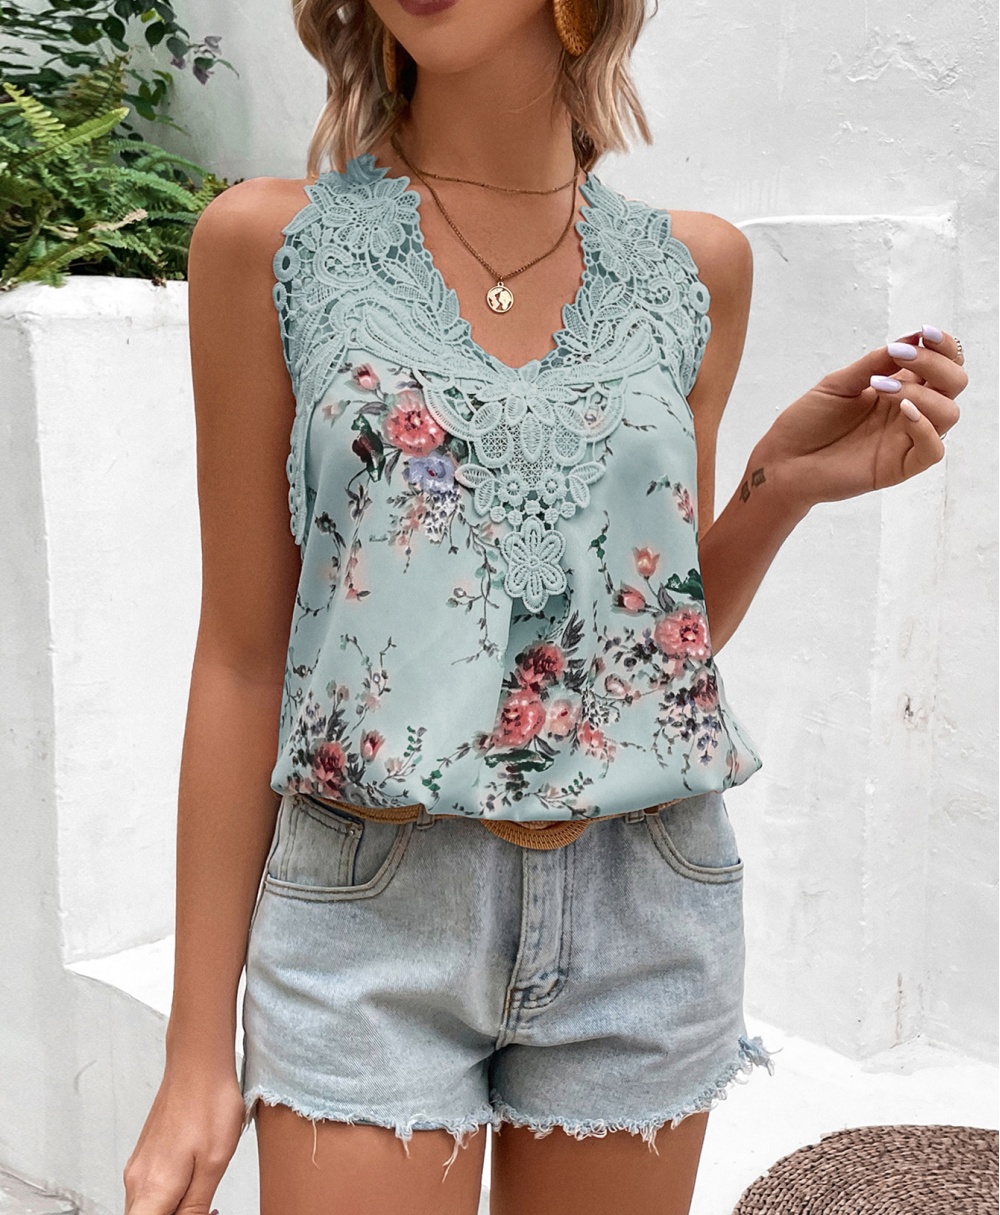 European style V-neck tops summer lace T-shirt for women